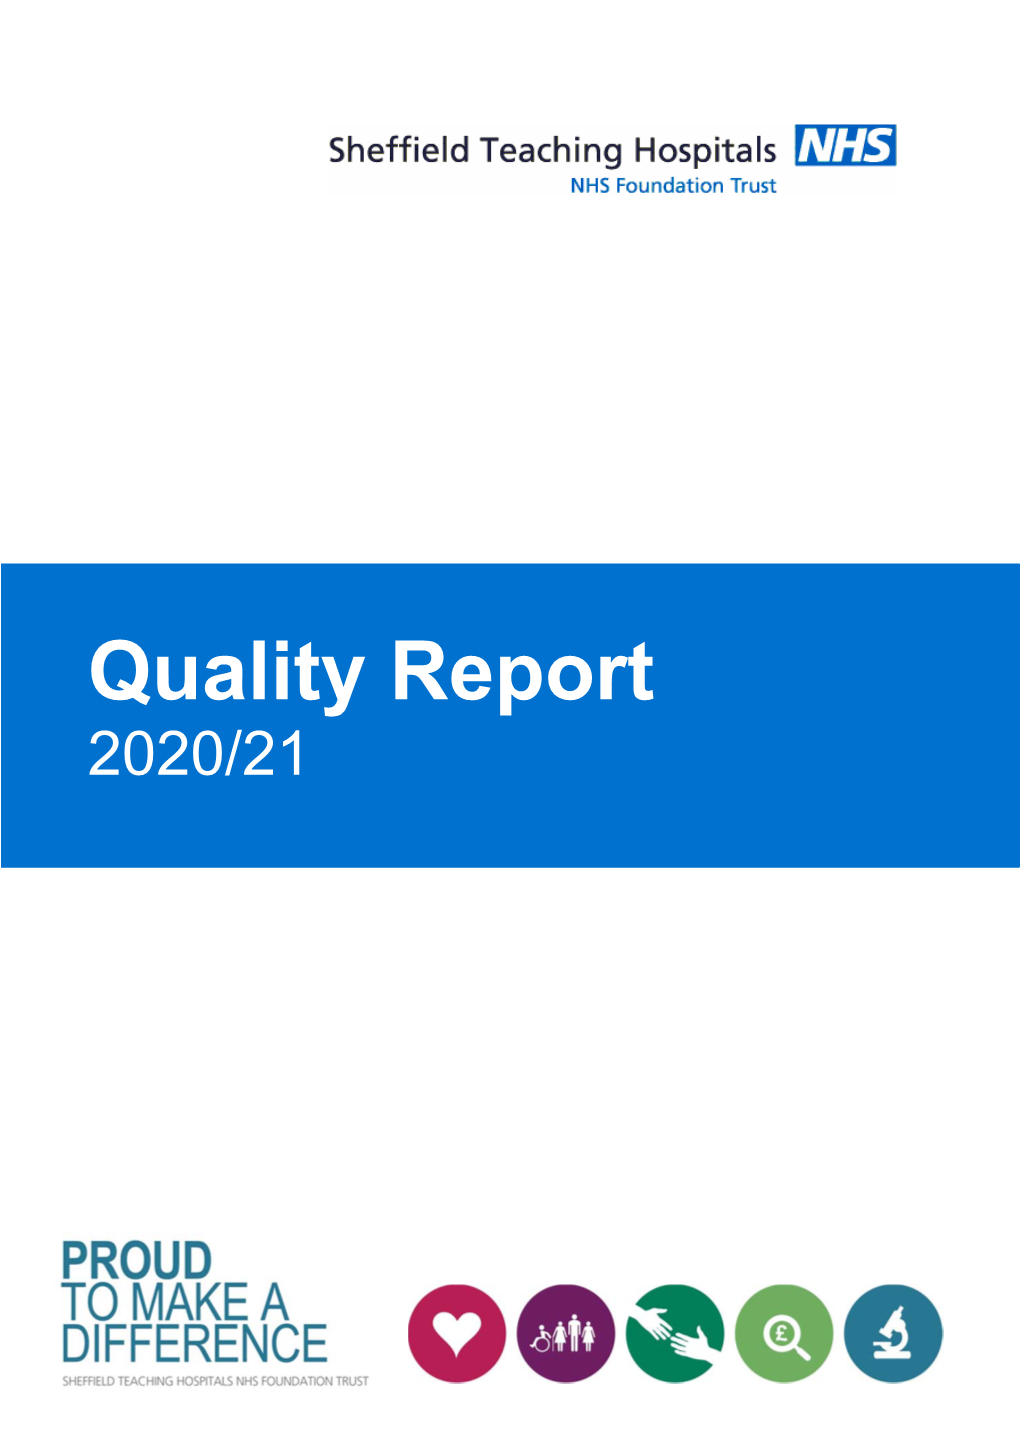 Quality Report 2020-21